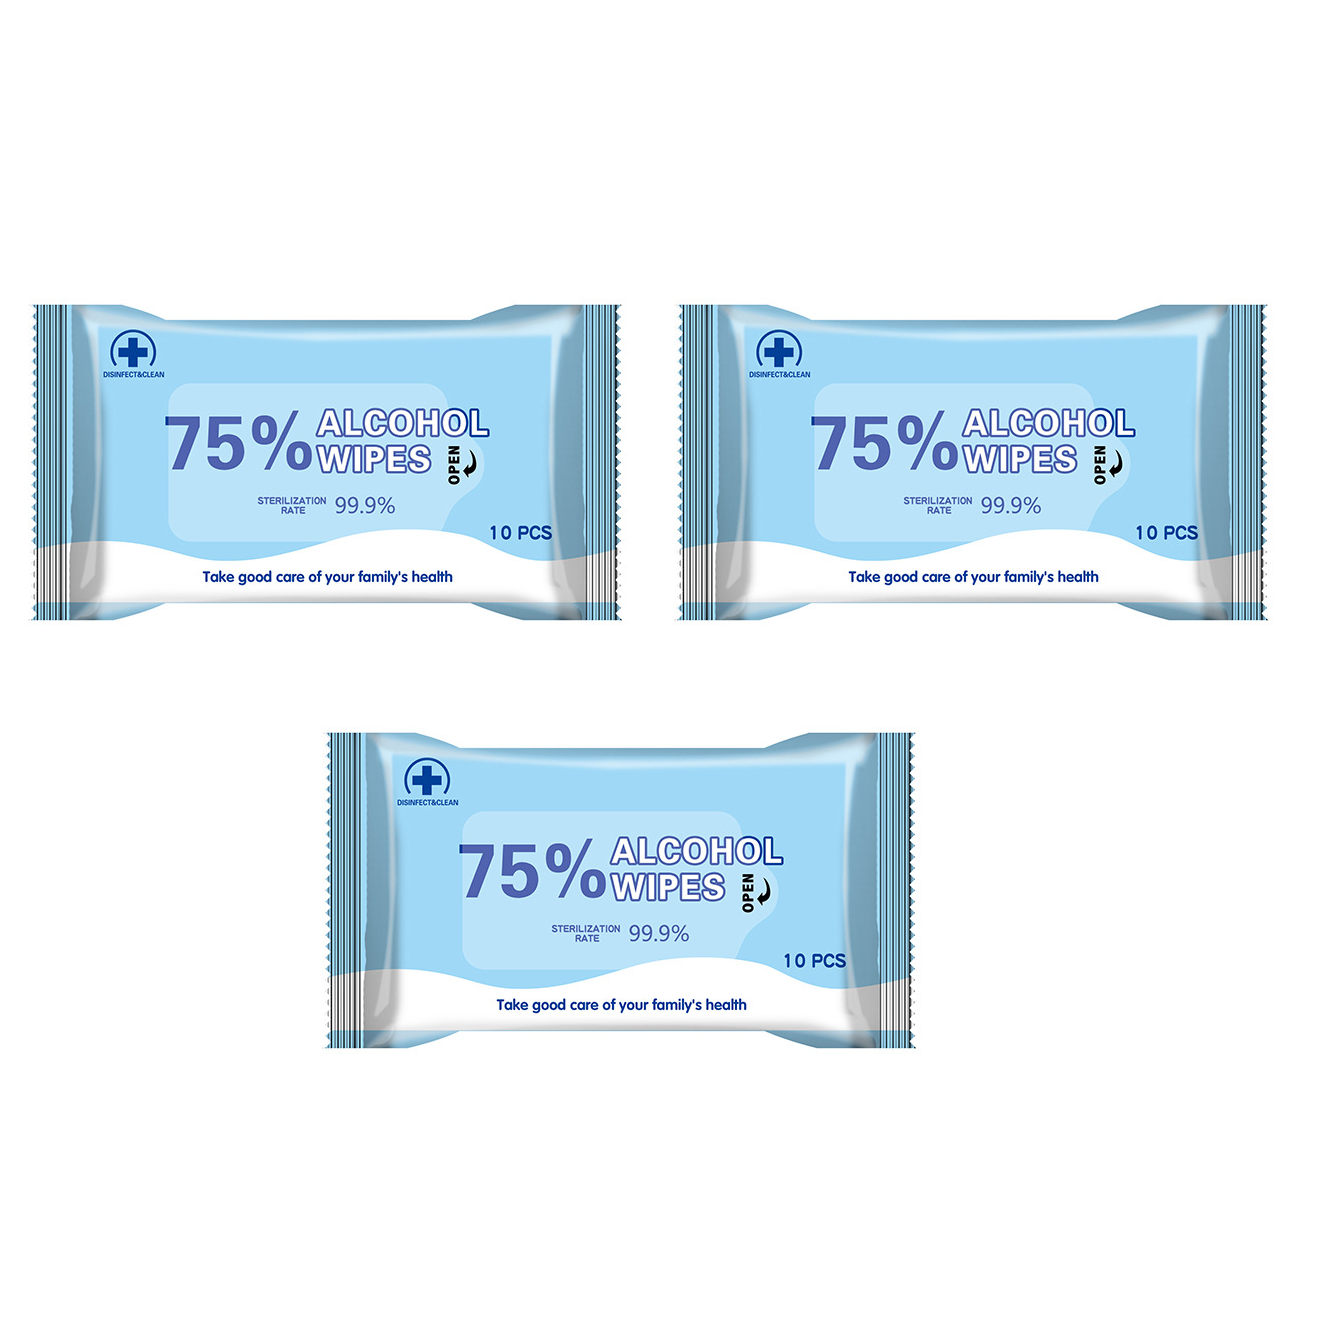 XINQING 3 Packs Of 10Pcs 75% Medical Alcohol Wipes 99.9% Antibacterial Disinfection Cleaning Wet Wipes Disposable Wipes for Cleaning and Sterilization in Office Home School Swab